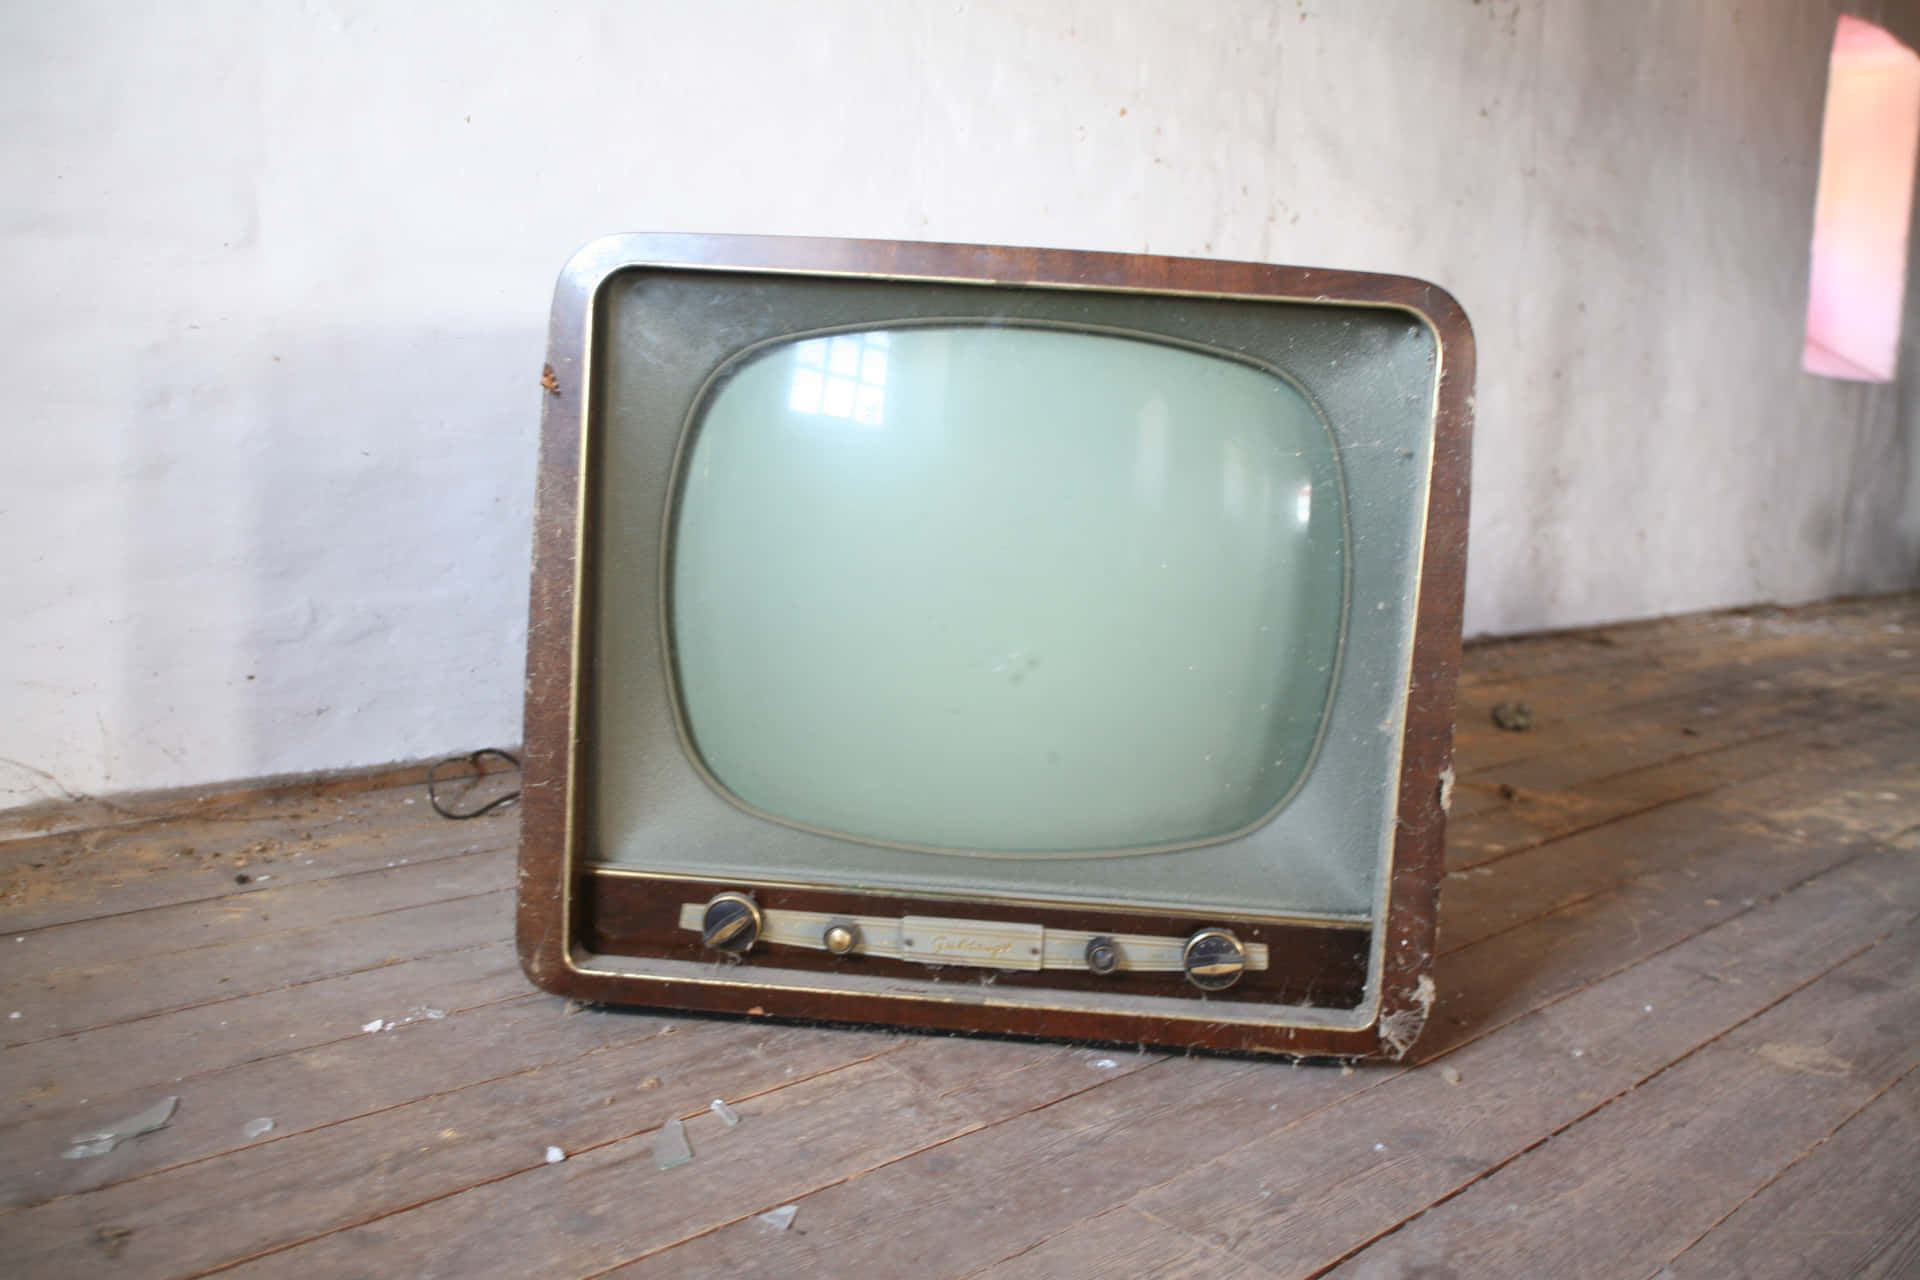 A Television Sitting On The Floor